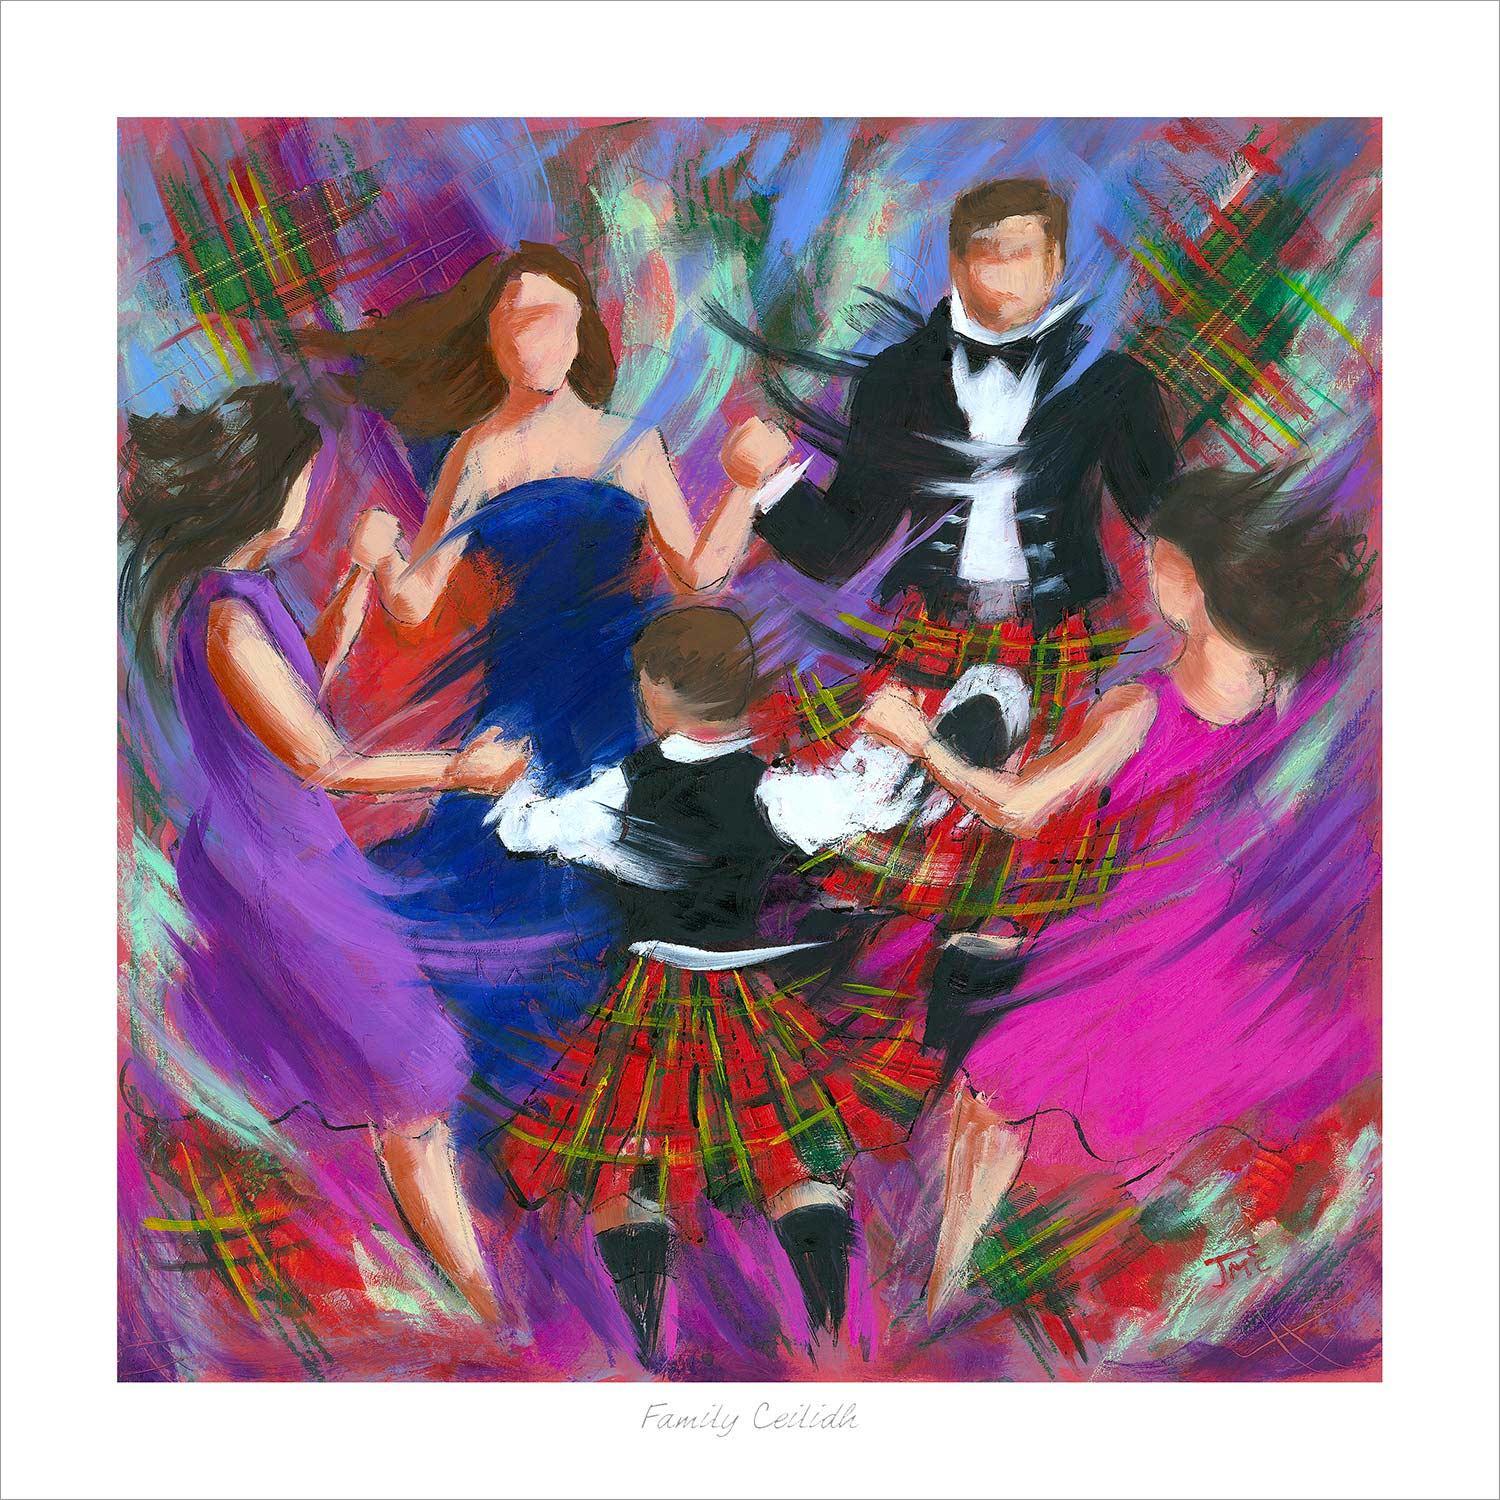 Family Ceilidh Art Print from an original painting by artist Janet McCrorie